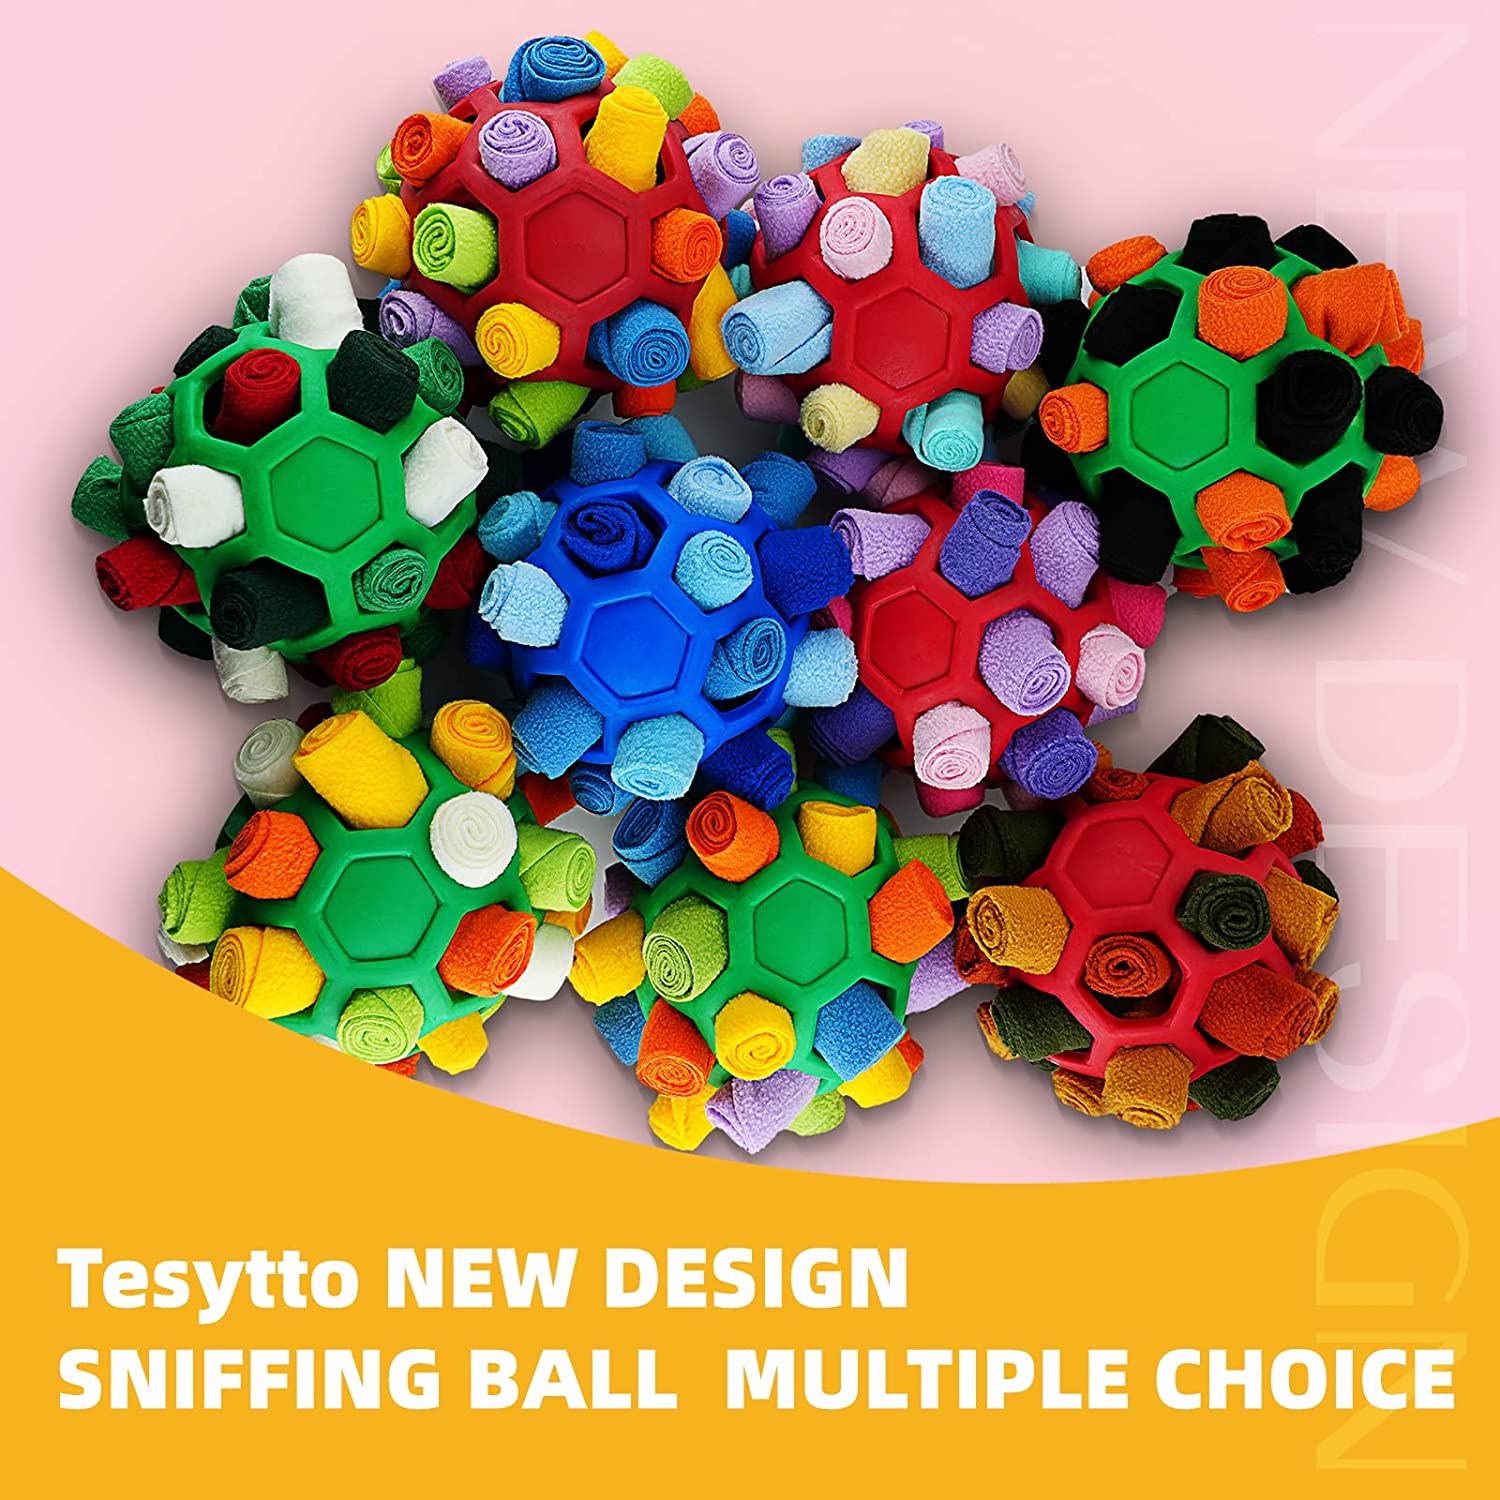 Pet Supplies : ailyfu Snuffle Ball for Dogs, Interactive Dog Snuffle Ball  with Dog Clicker, Dog Enrichment Toys Encourages Natural Foraging Skills,  Slow Feeder Treat Ball, Puzzle Toys for Small & Medium